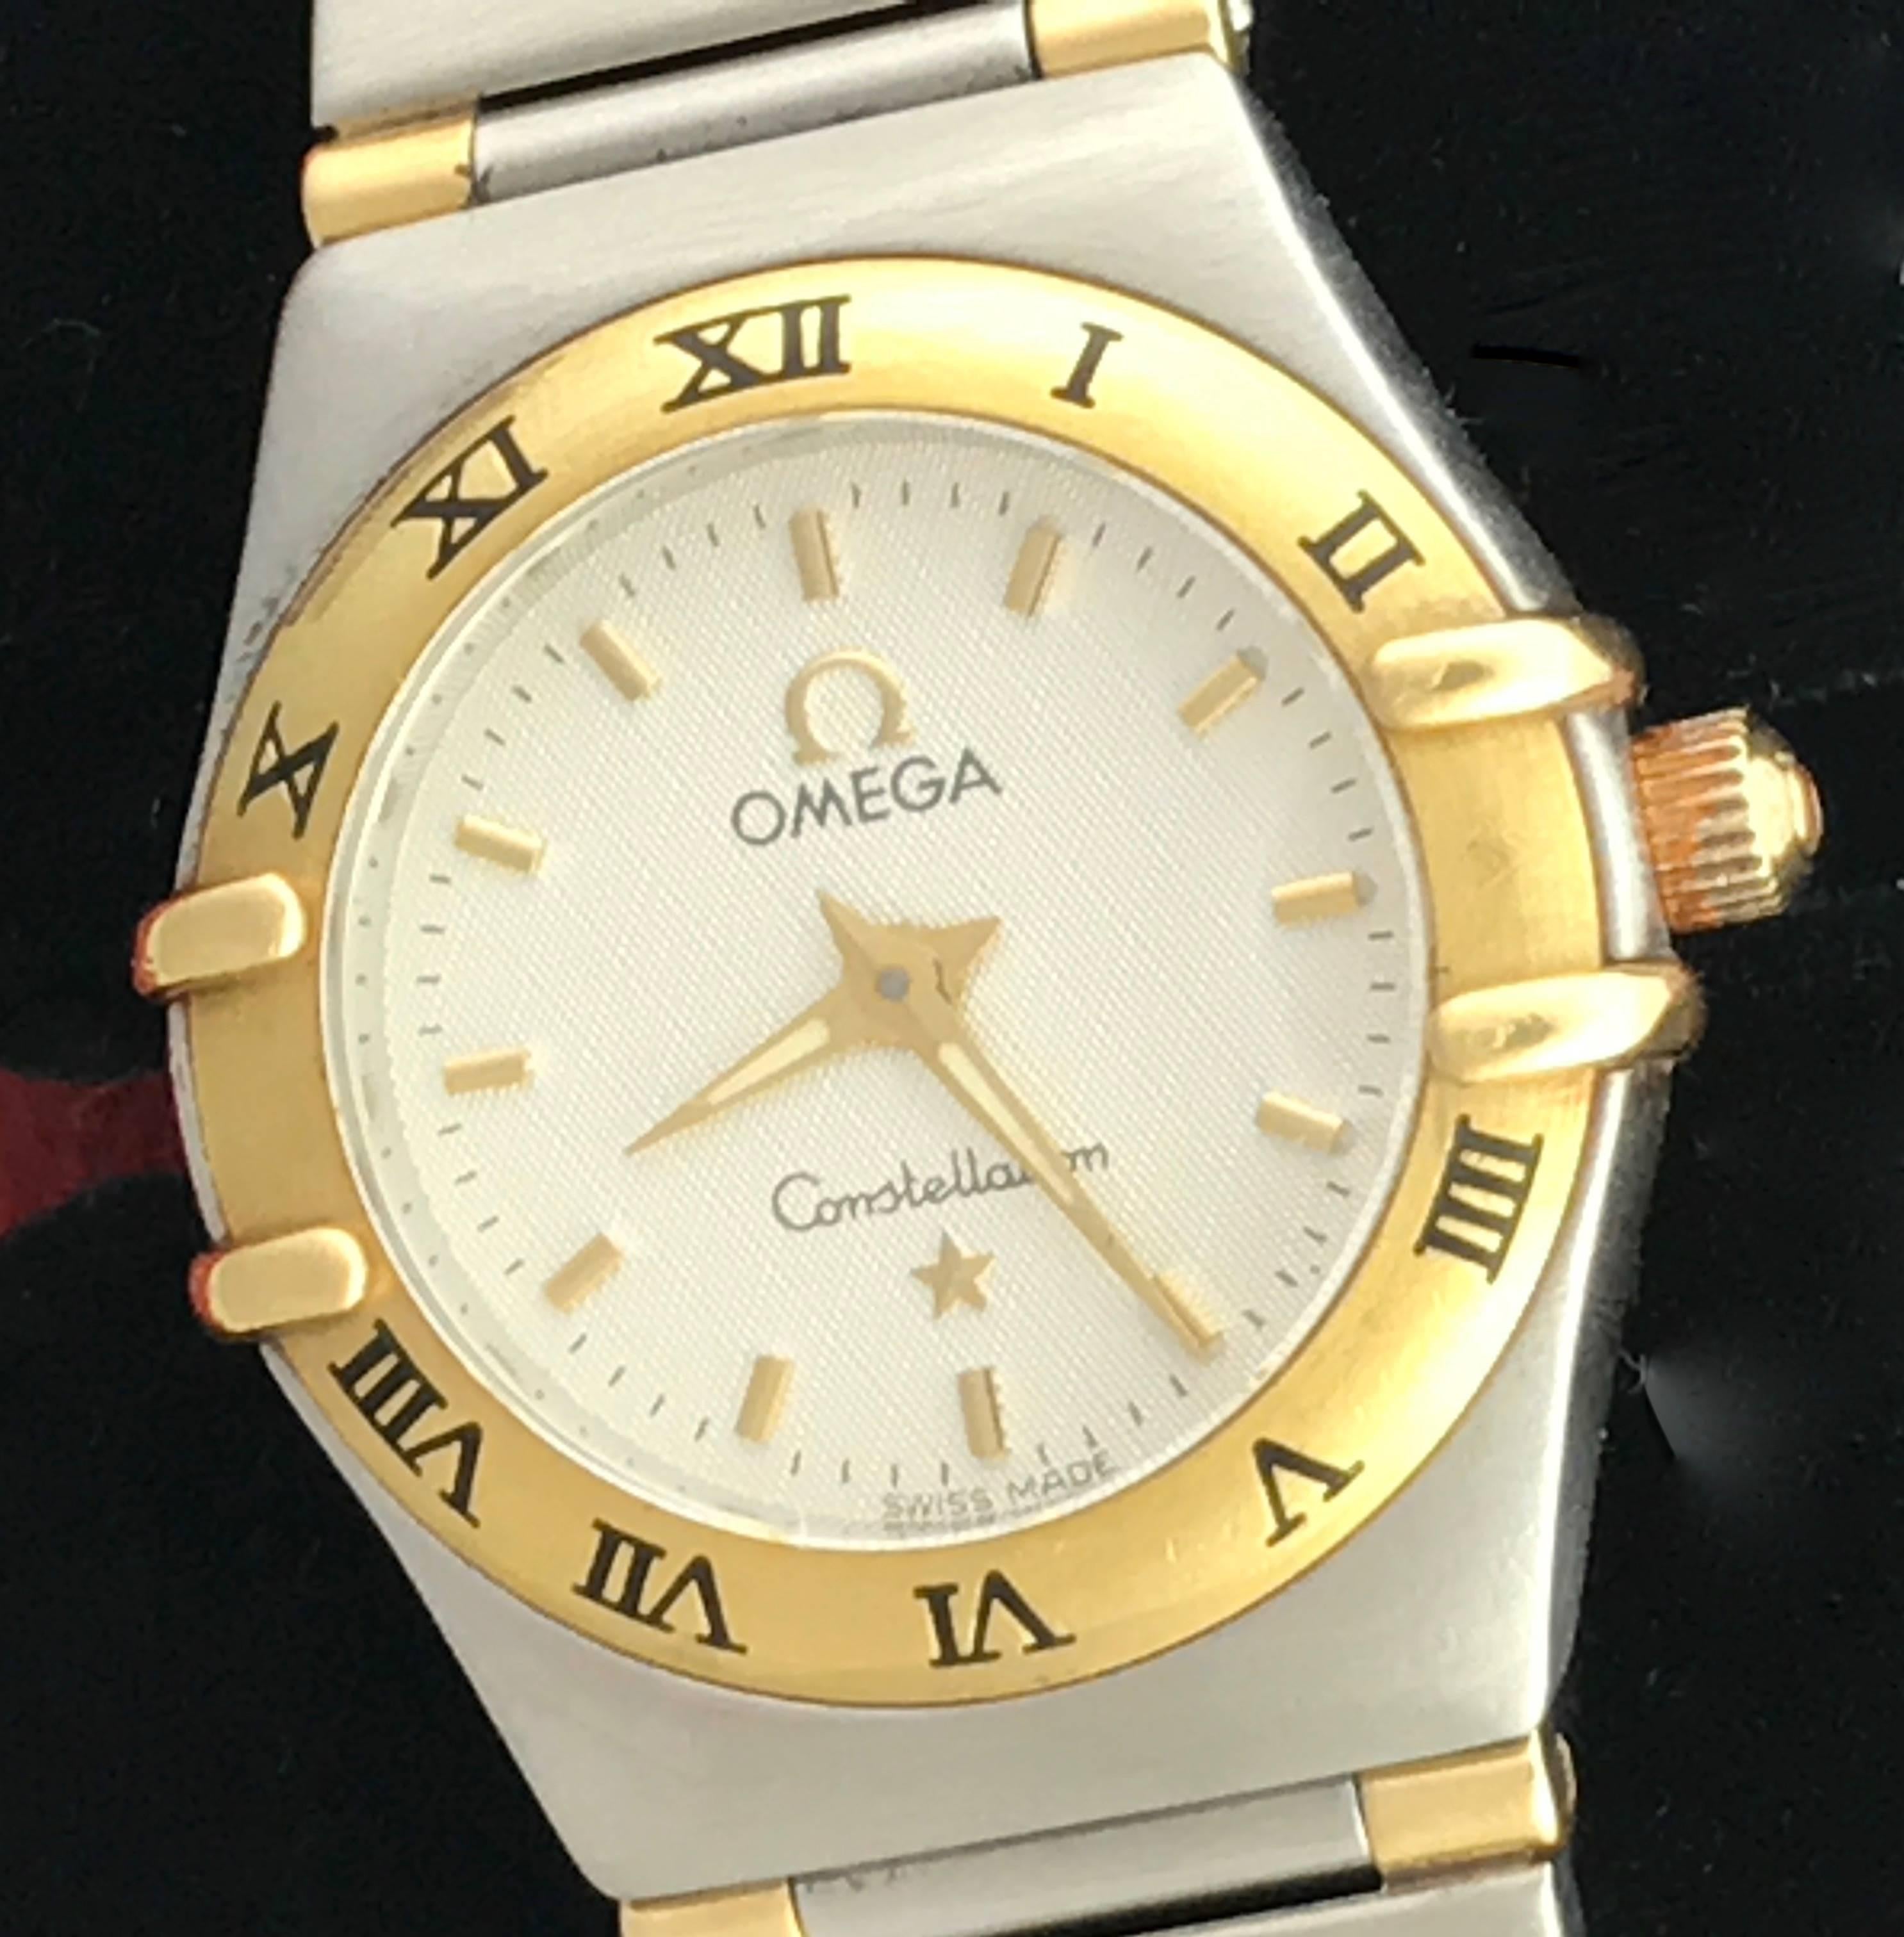 Omega Constellation ladies quartz pre-owned wrist watch. This beautiful classic Omega features a silvered dial with polished hour markers and classic stainless steel case with 18k bezel adorned with black roman numerals. Measures 22mm. This watch is